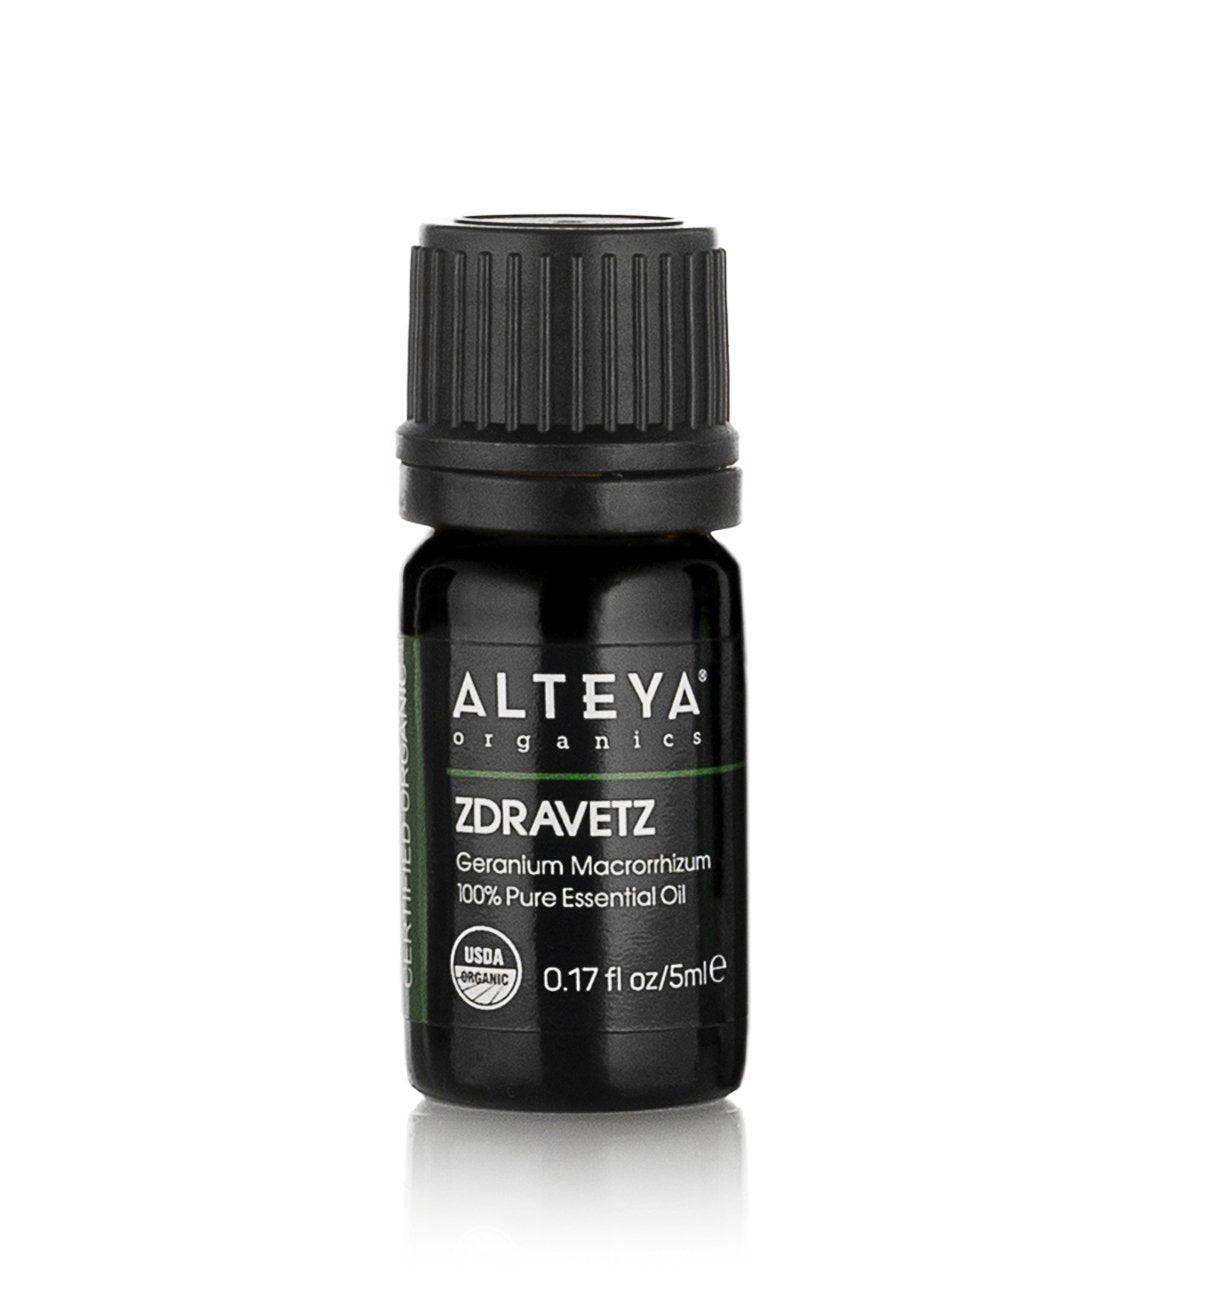 A bottle of Alteya Organics Zdravetz essential oil, ideal for oily skin and infused with the essence of Bulgarian culture.